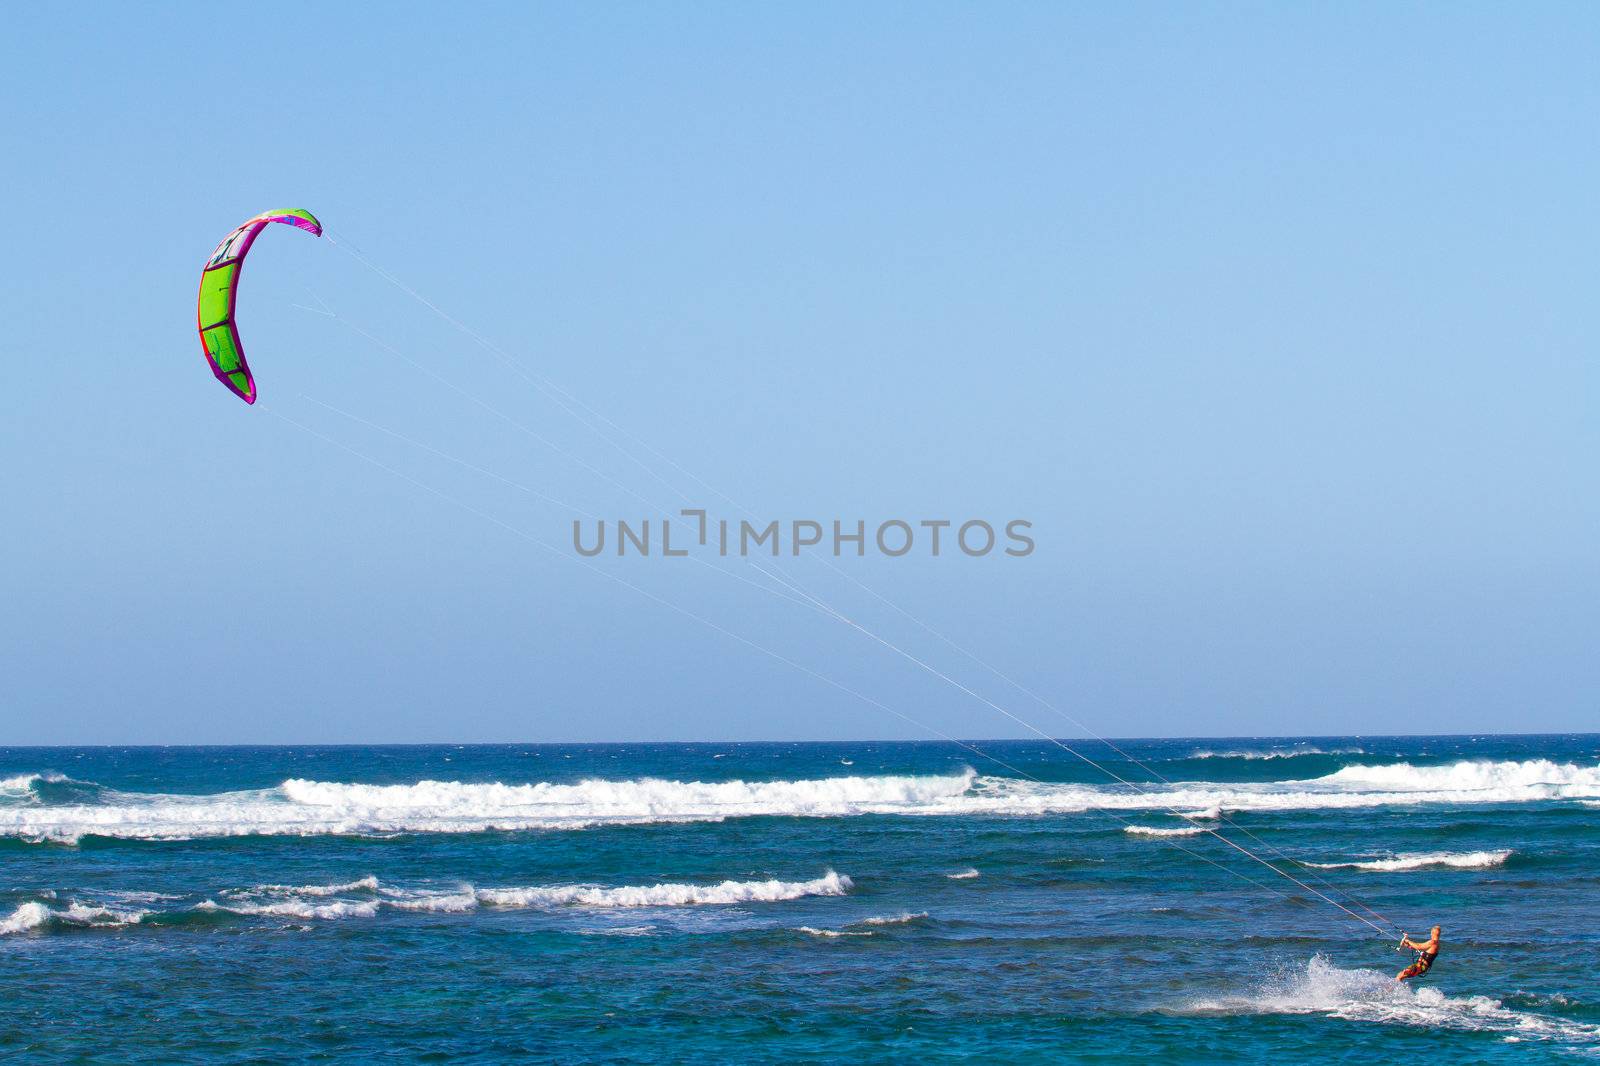 A man kite surfing in the waves along the north shore of Oahu. The kite is high above in the sky with plenty of wind to propel the man through the water on his surf board.